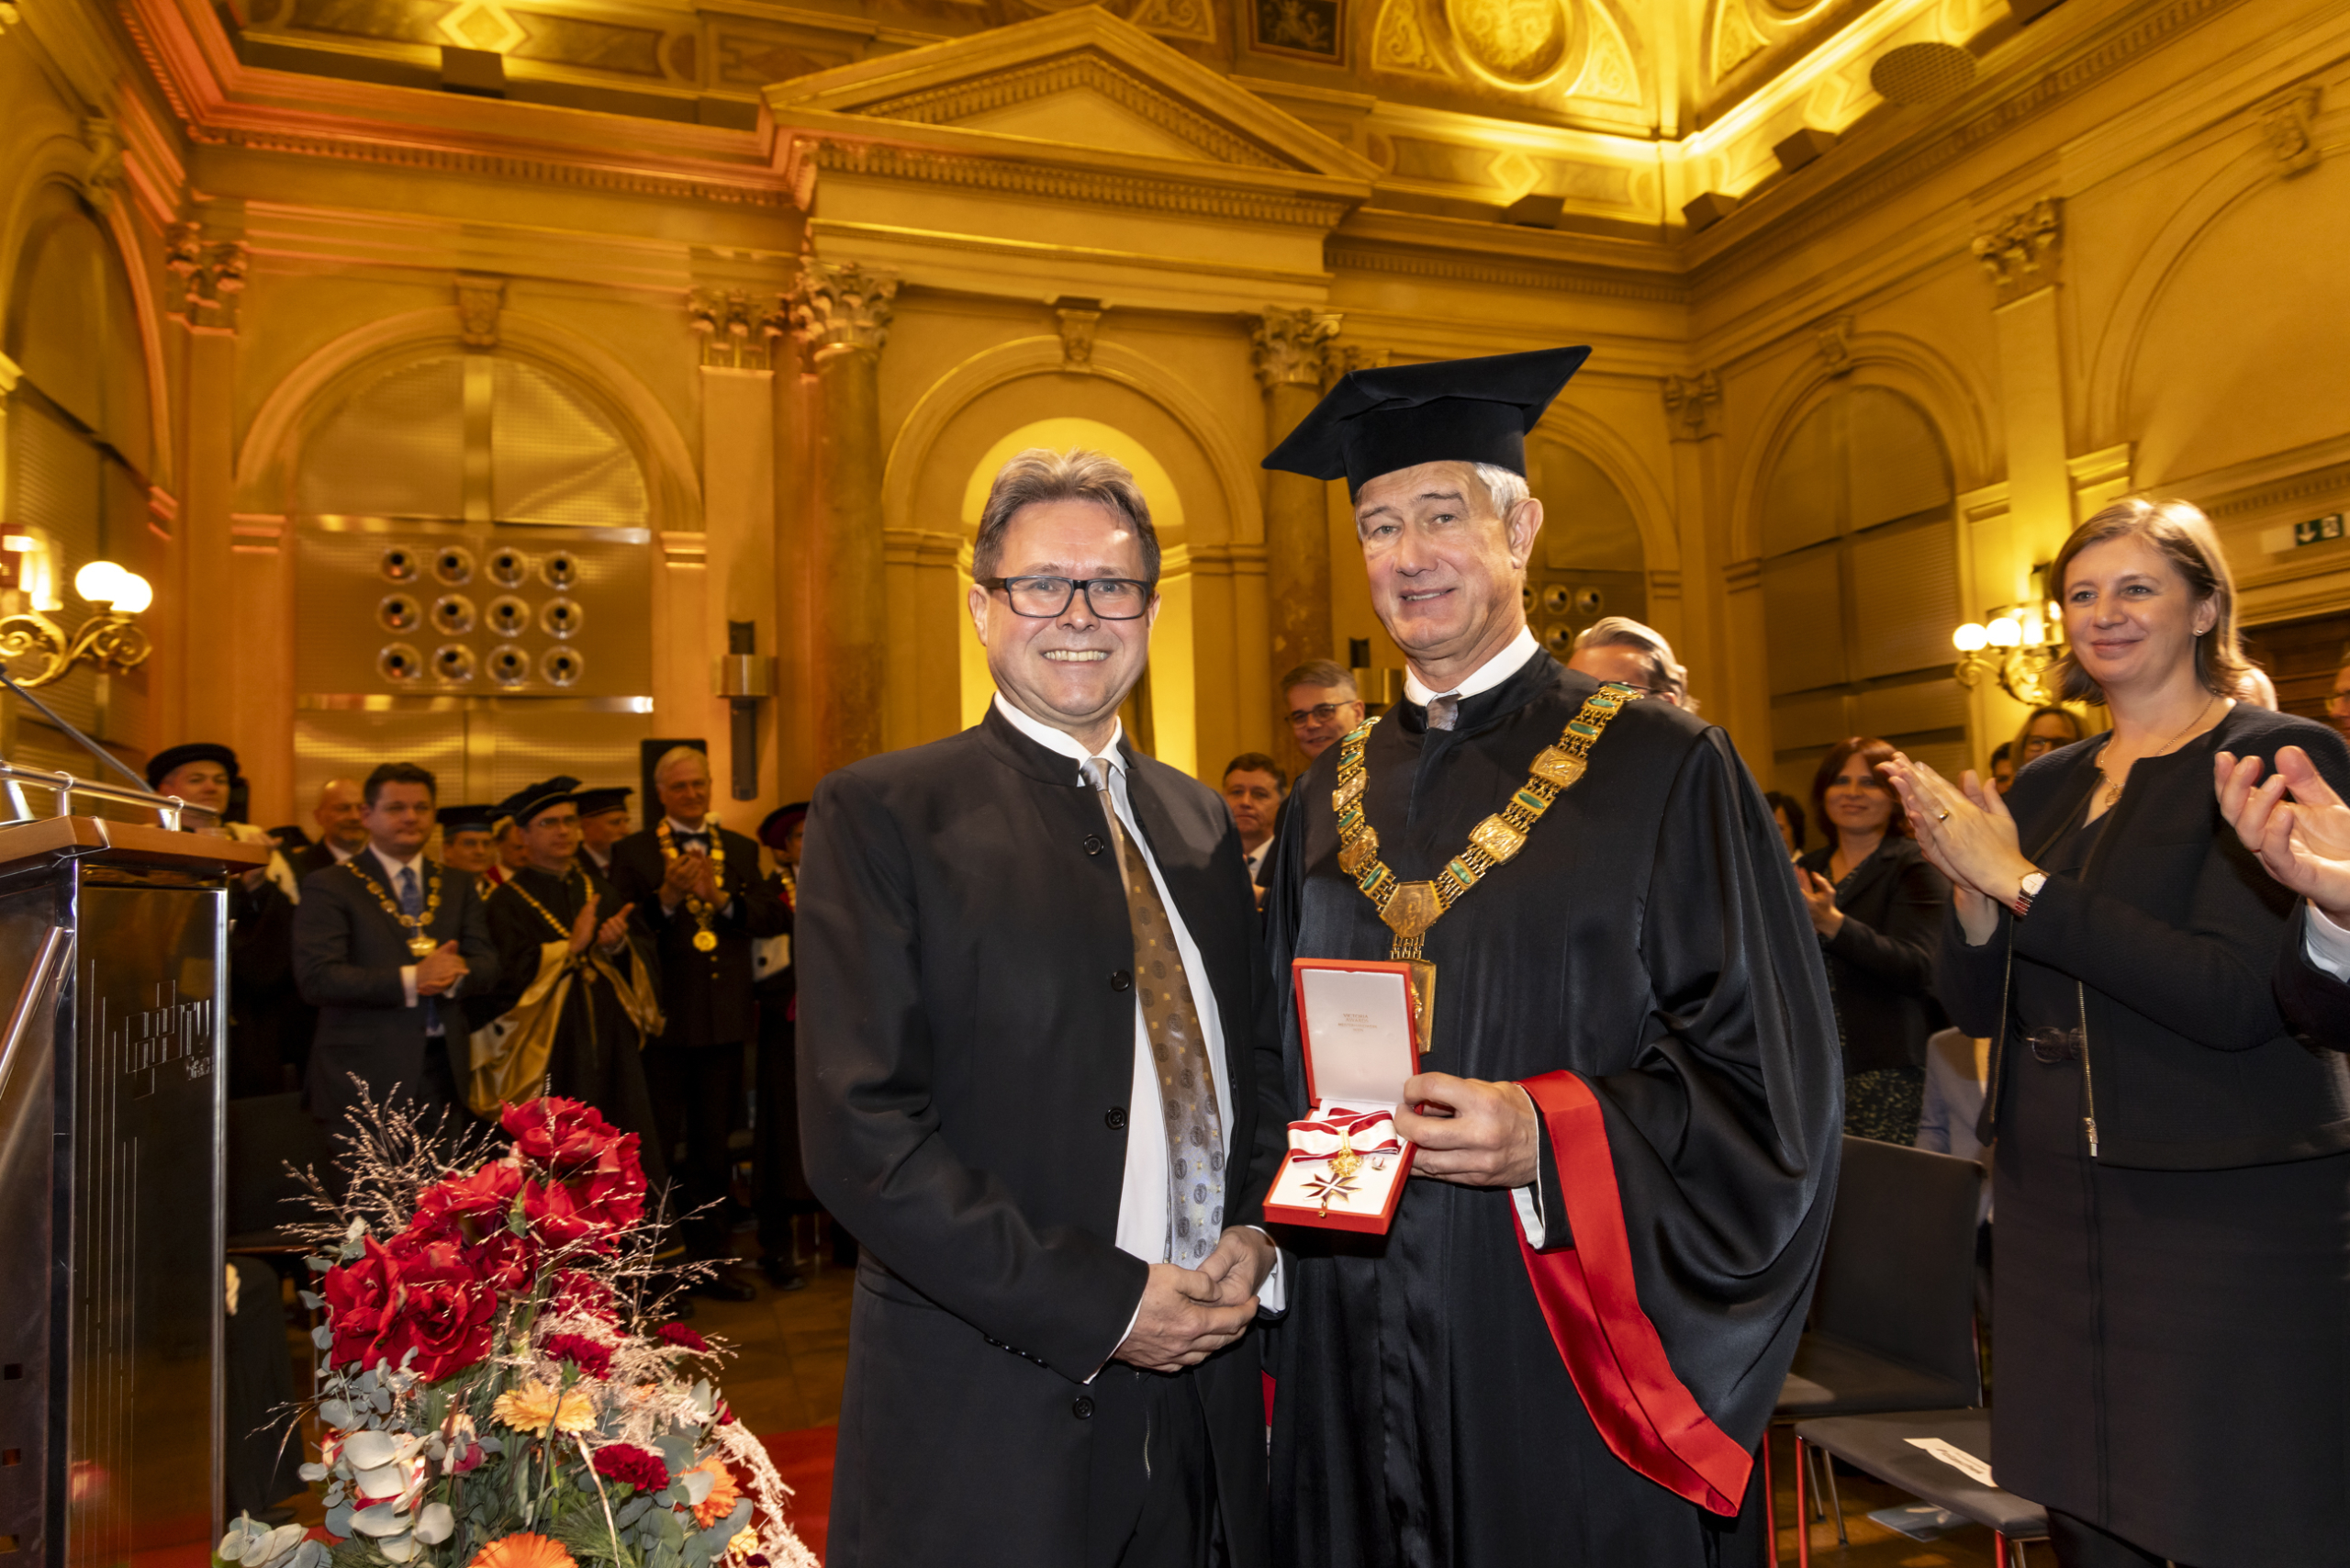 ESEIA President Harald Kainz Receives Grand Decoration of Honour in Gold From the Republic of Austria and the State of Styria